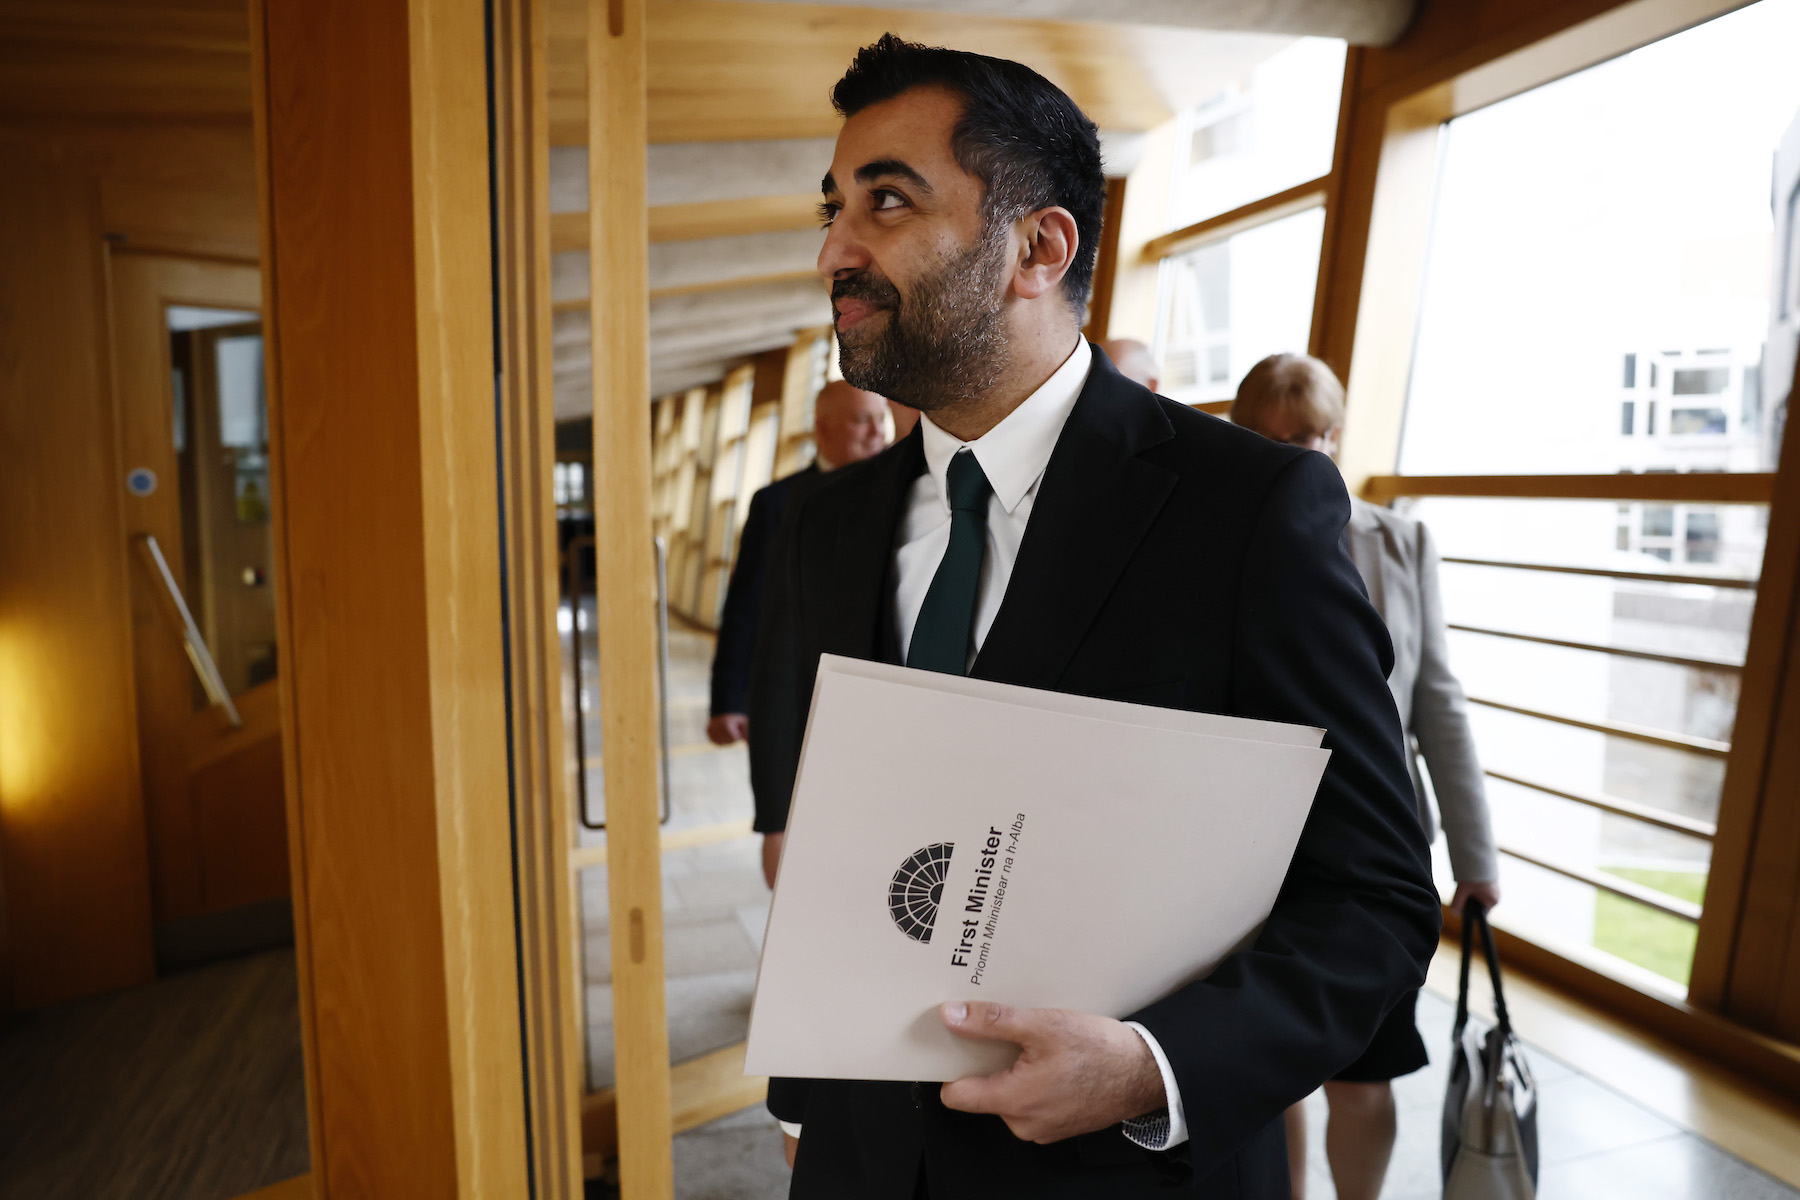 Humza Yousaf Has Become Scotland’s First Muslim And Person Of Color Leader